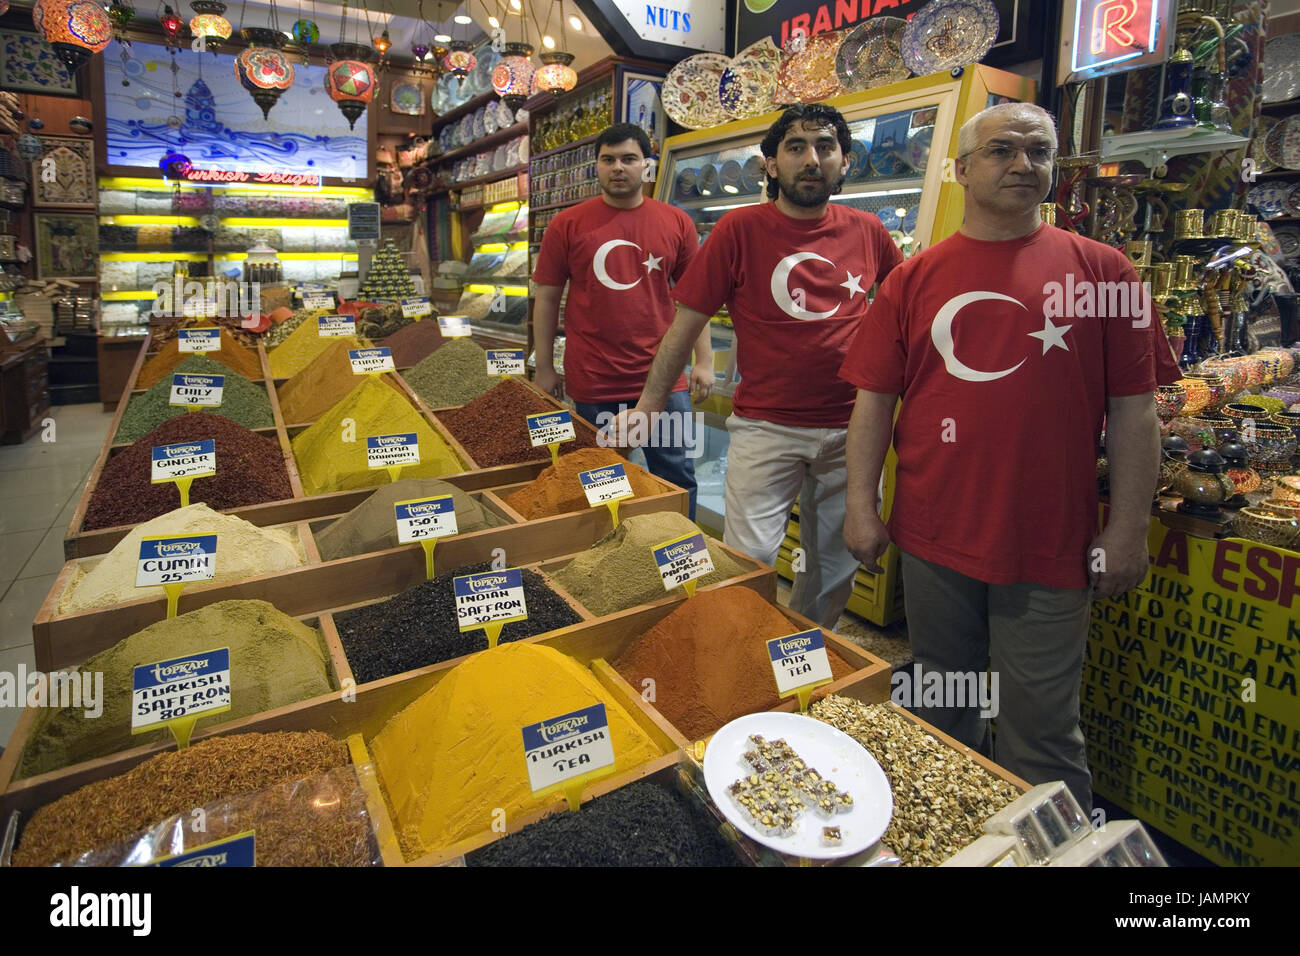 Turkey,Istanbul,spice market,business,seller,no model release,town,city,metropolis,port,culture,place of interest,bazaar,market,person,men,locals,Turks,T-shirts,red,national flag,product,offer,amount,choice,inside,heaps,spices, Stock Photo